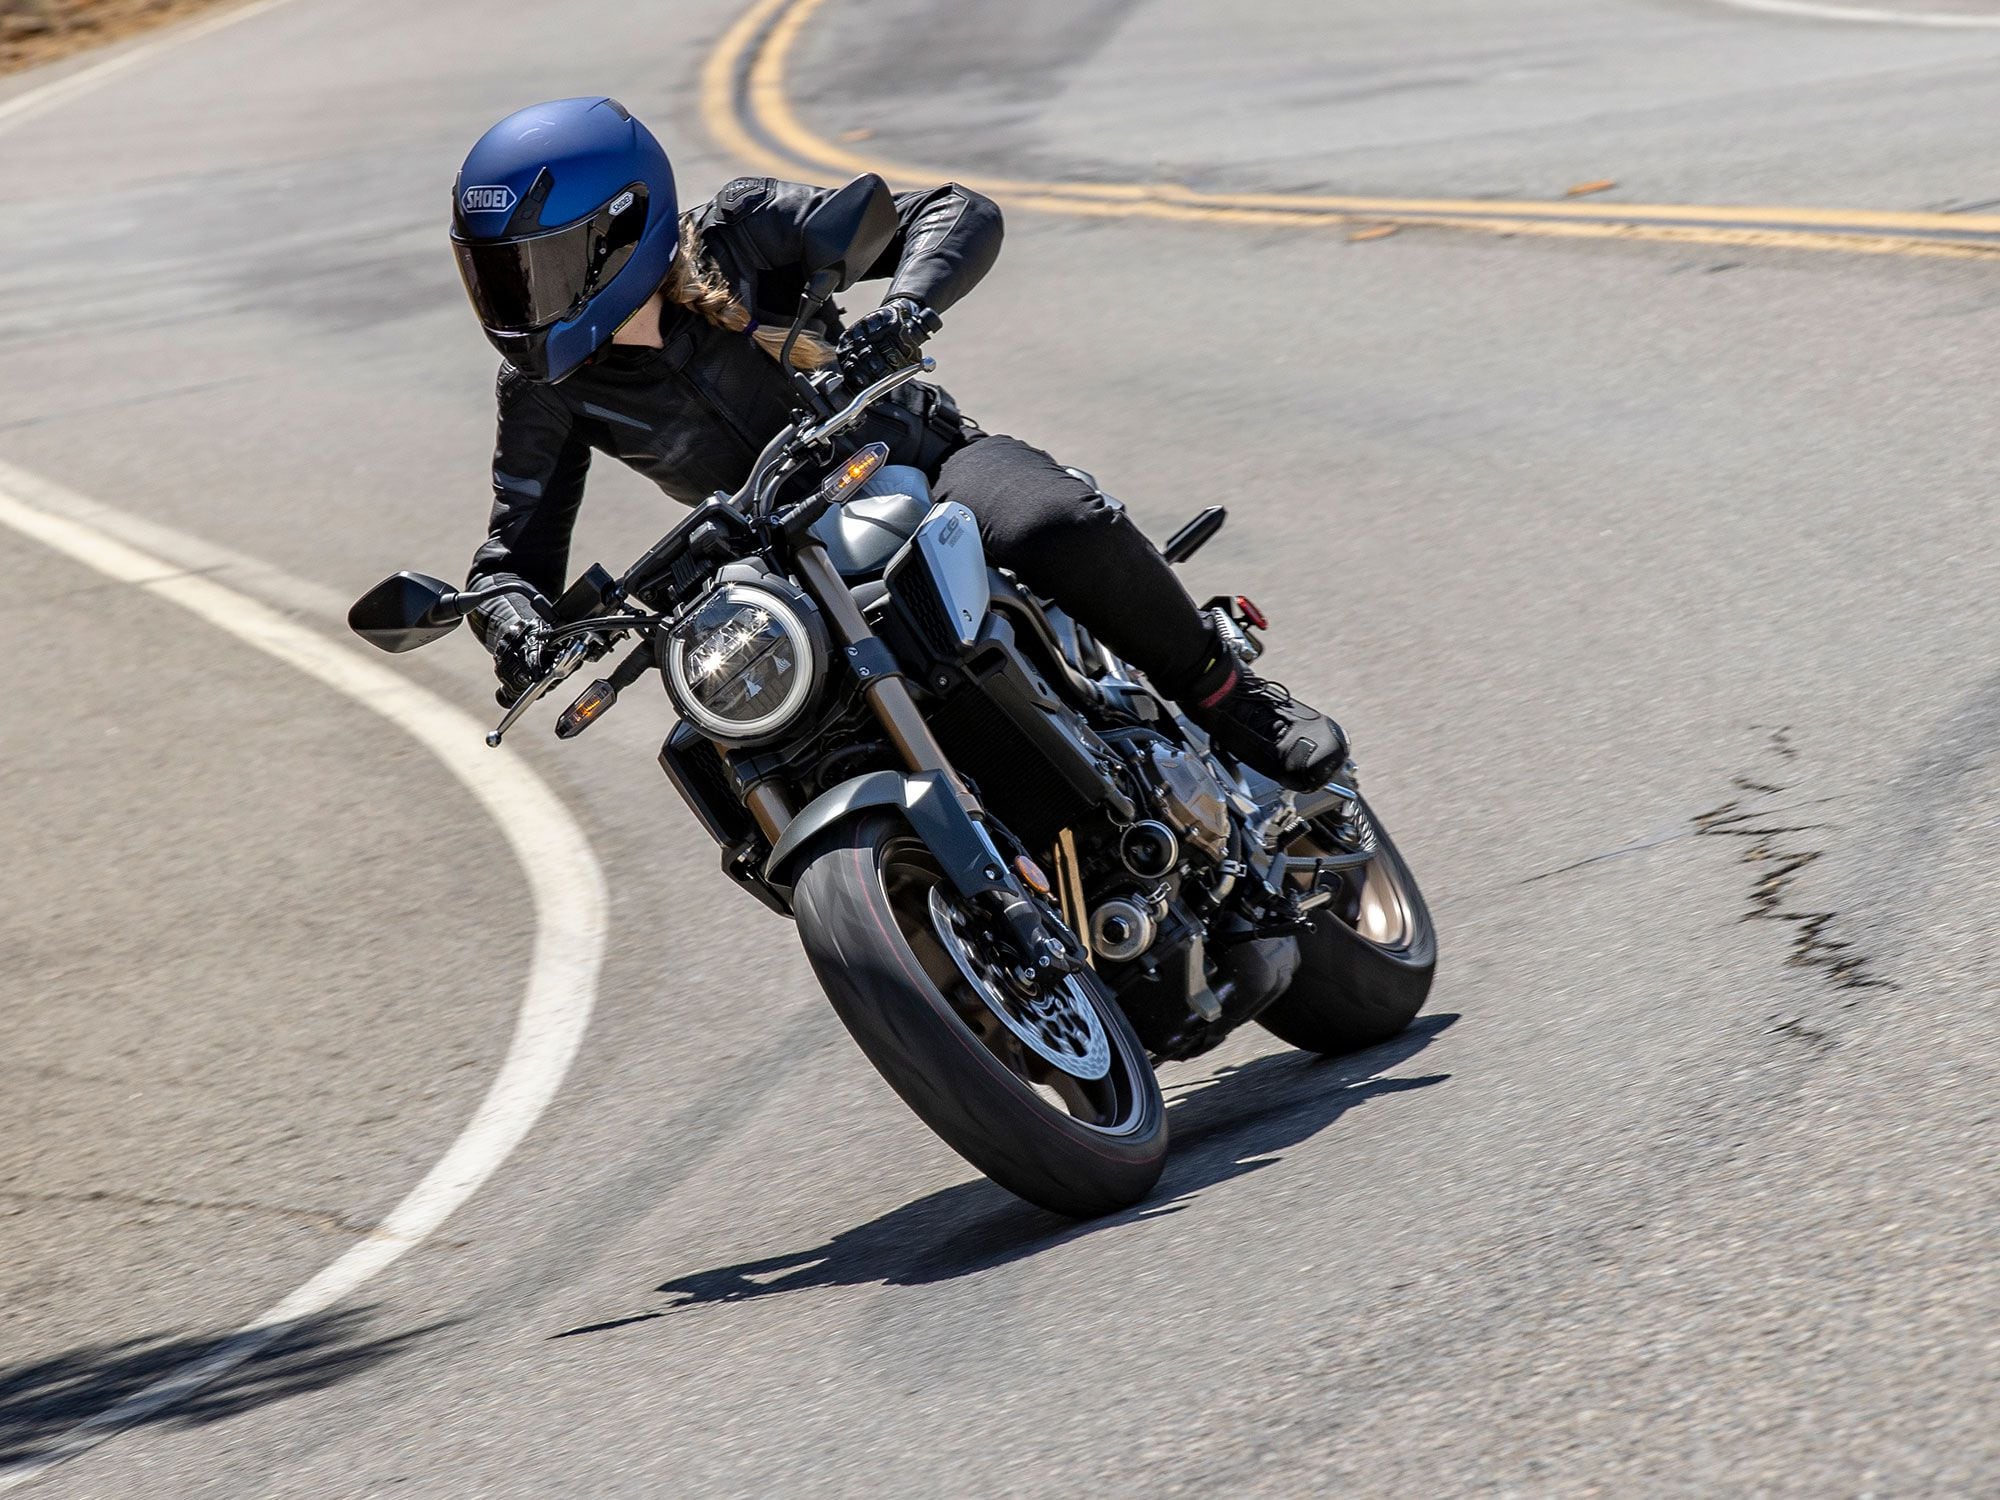 EXCLUSIVE: 2021 Honda CB650R India Review – An Underrated Pricey